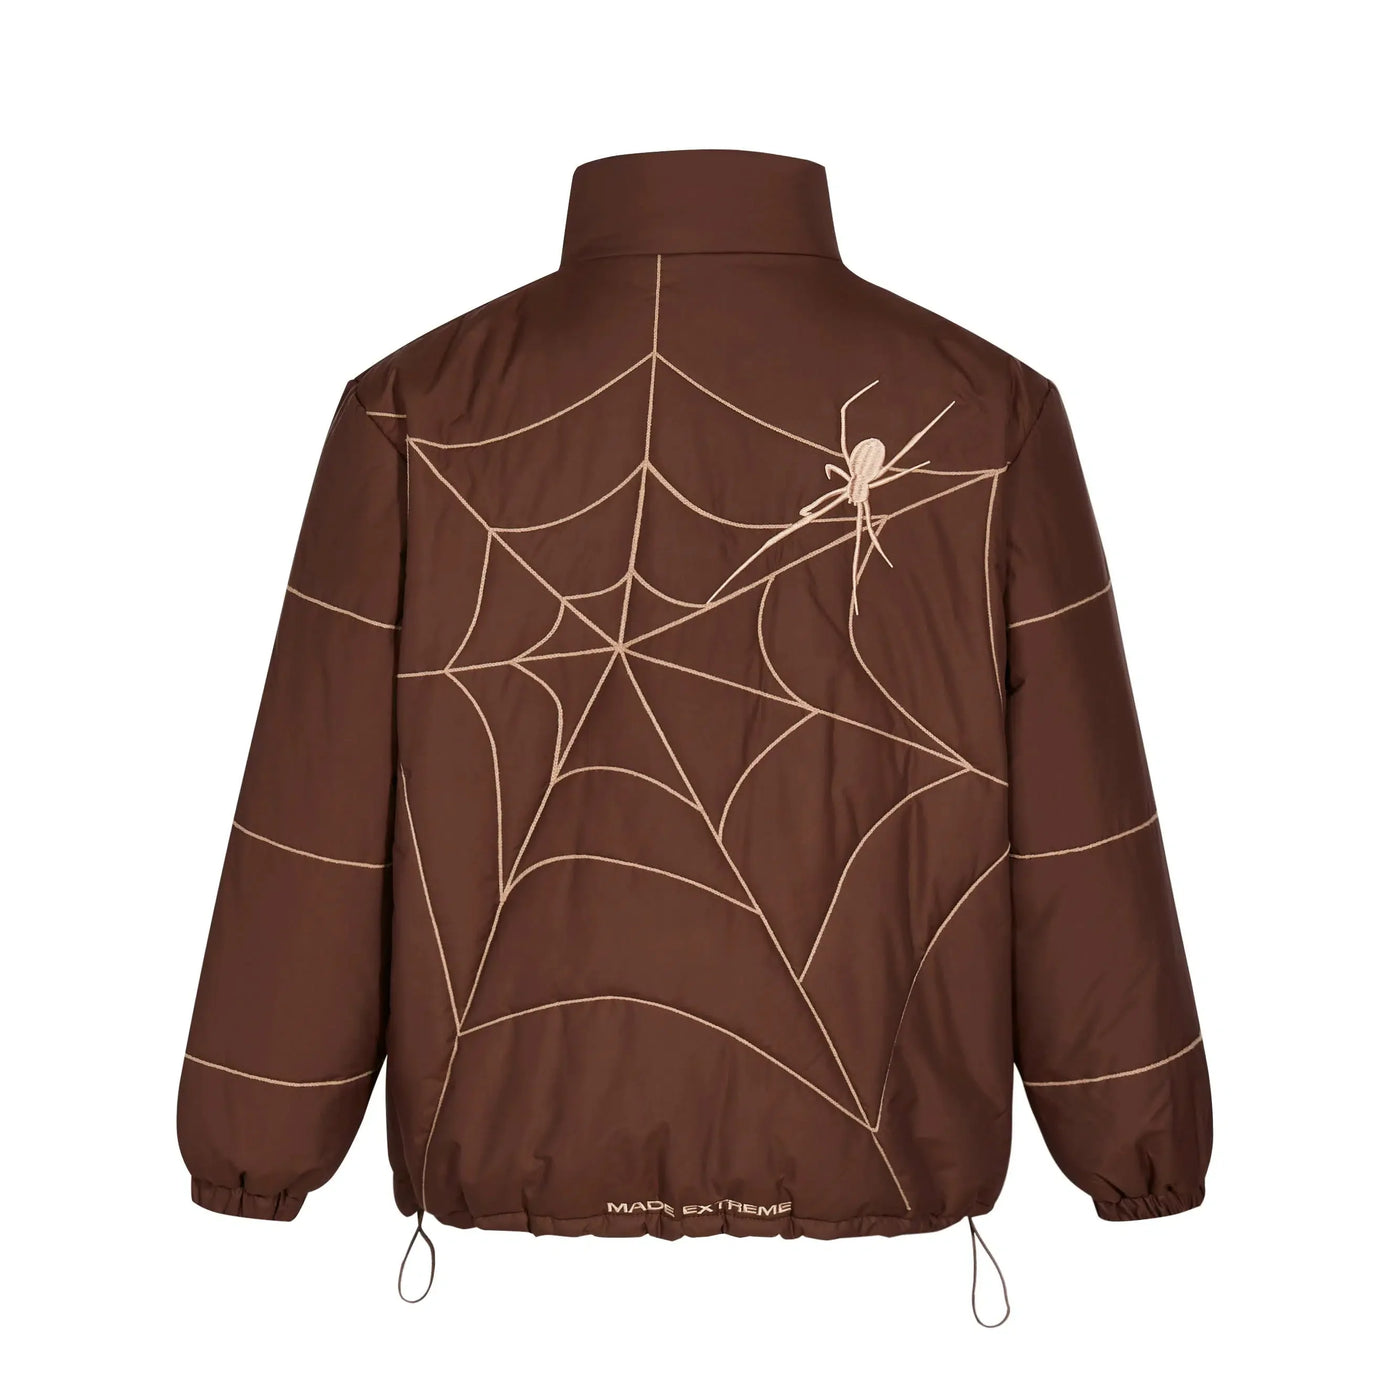 Stand Collar Spider Web Cotton Jacket Korean Street Fashion Jacket By Made Extreme Shop Online at OH Vault